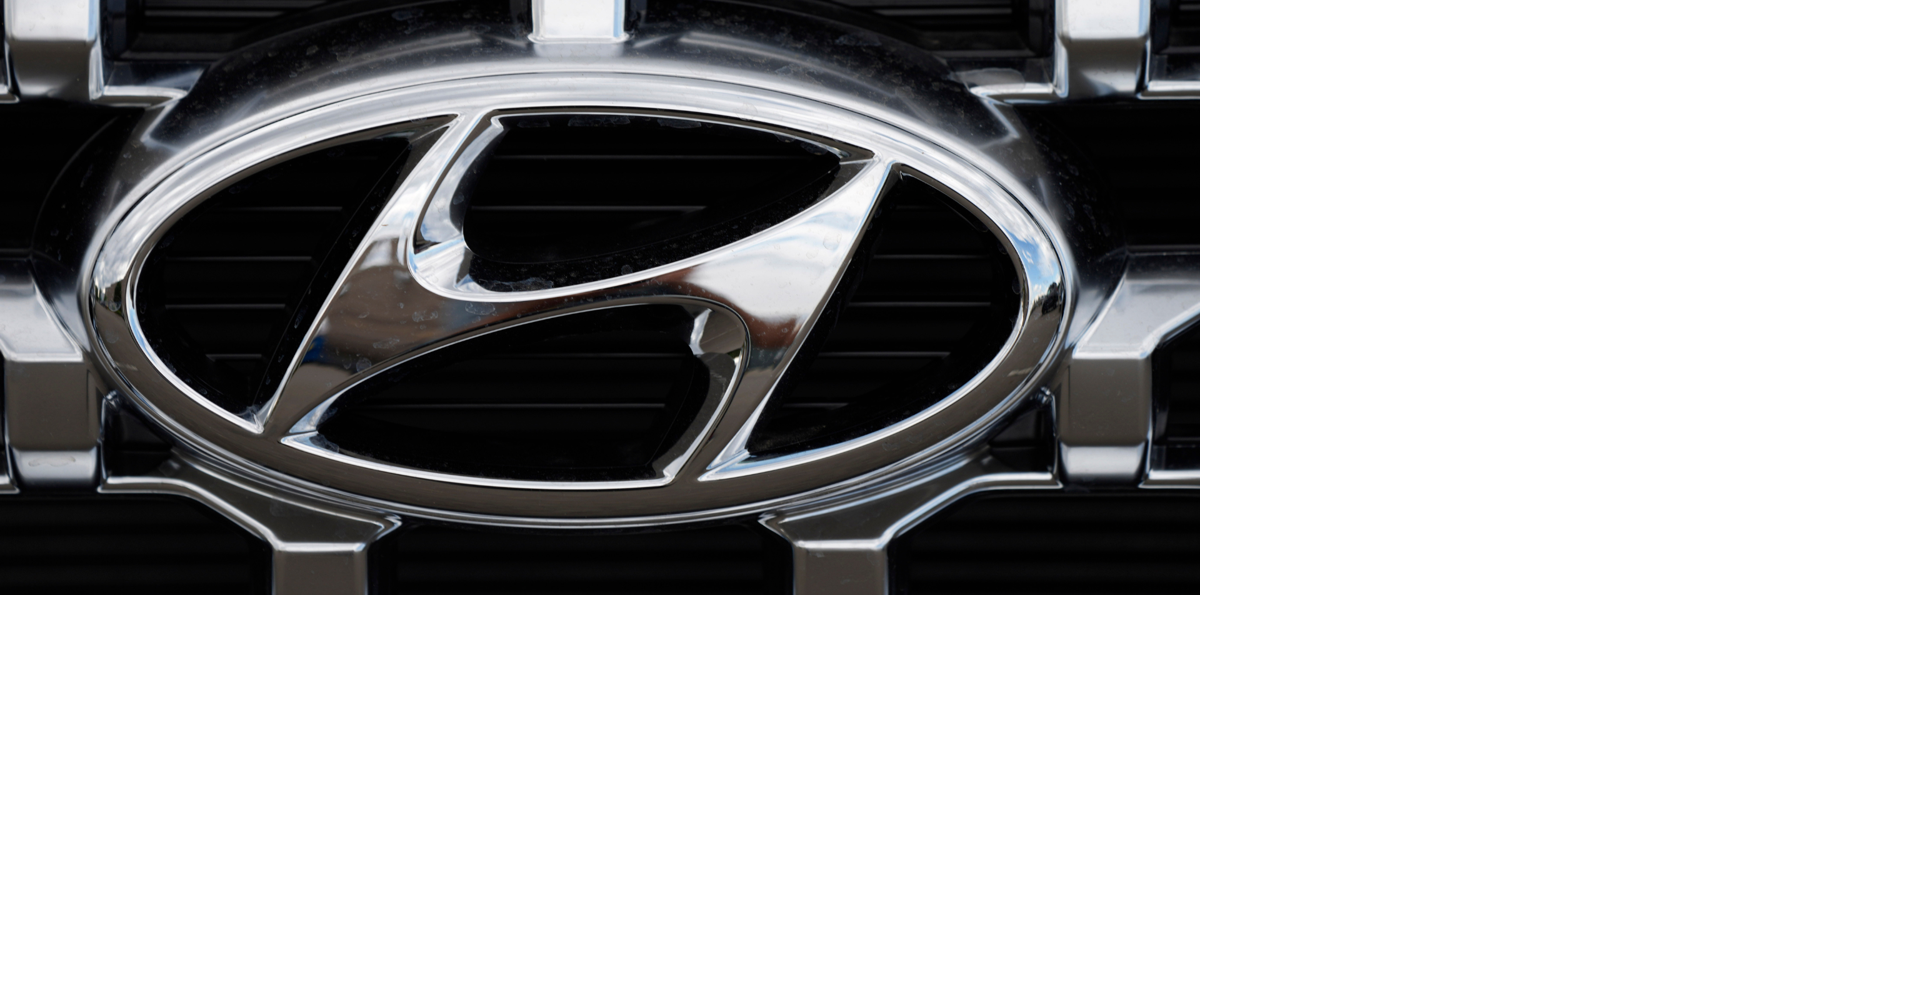 Hyundai to host anti-theft software event